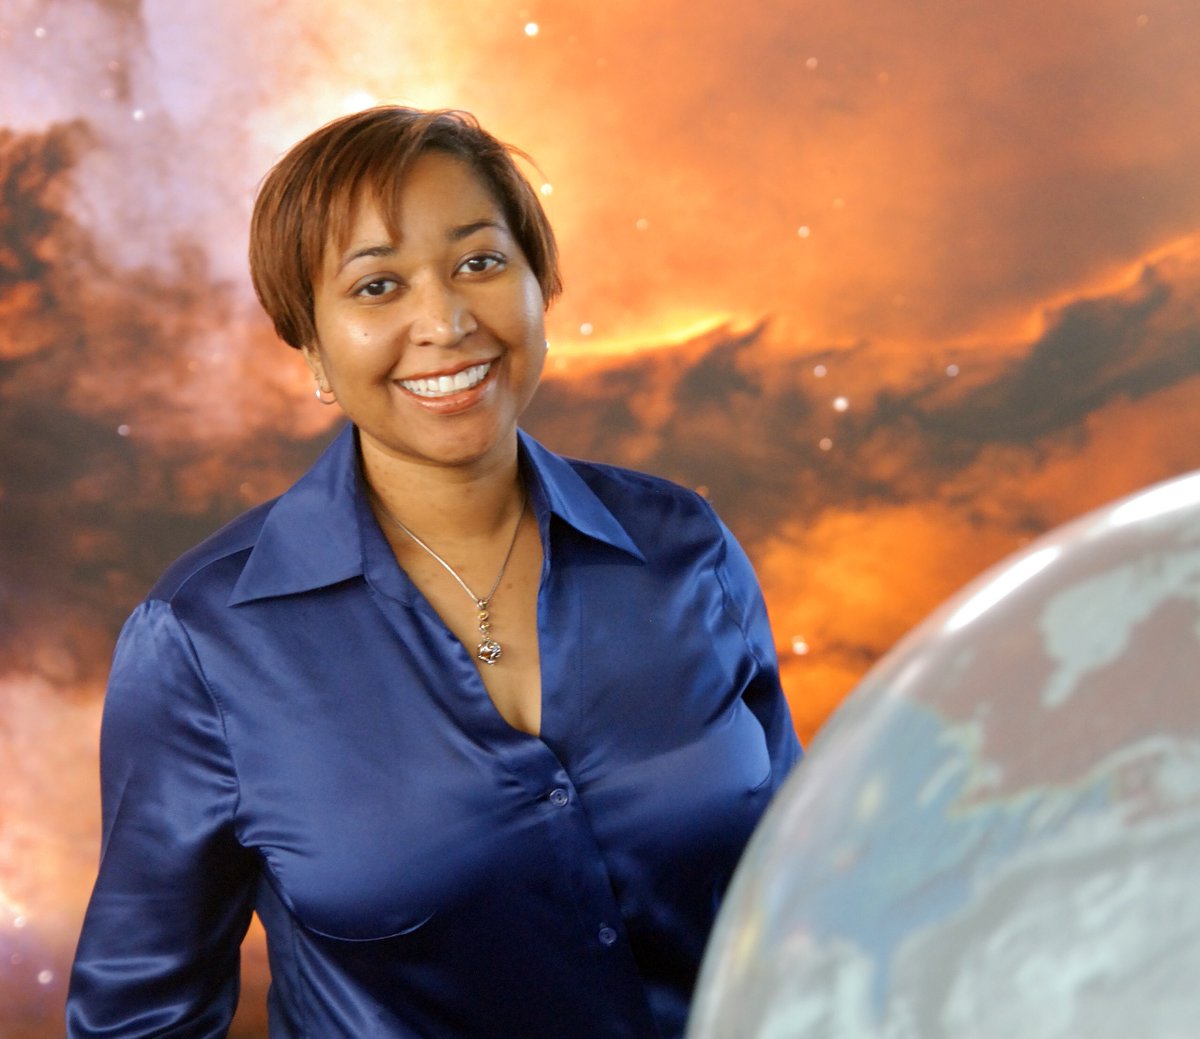 Dr. Beth A. Brown (1969-2008) was a NASA astrophysicist who specialized in the study of x-ray emissions from galaxies. She went to work at Goddard Space Flight Center furthering science communications and higher education. (5)